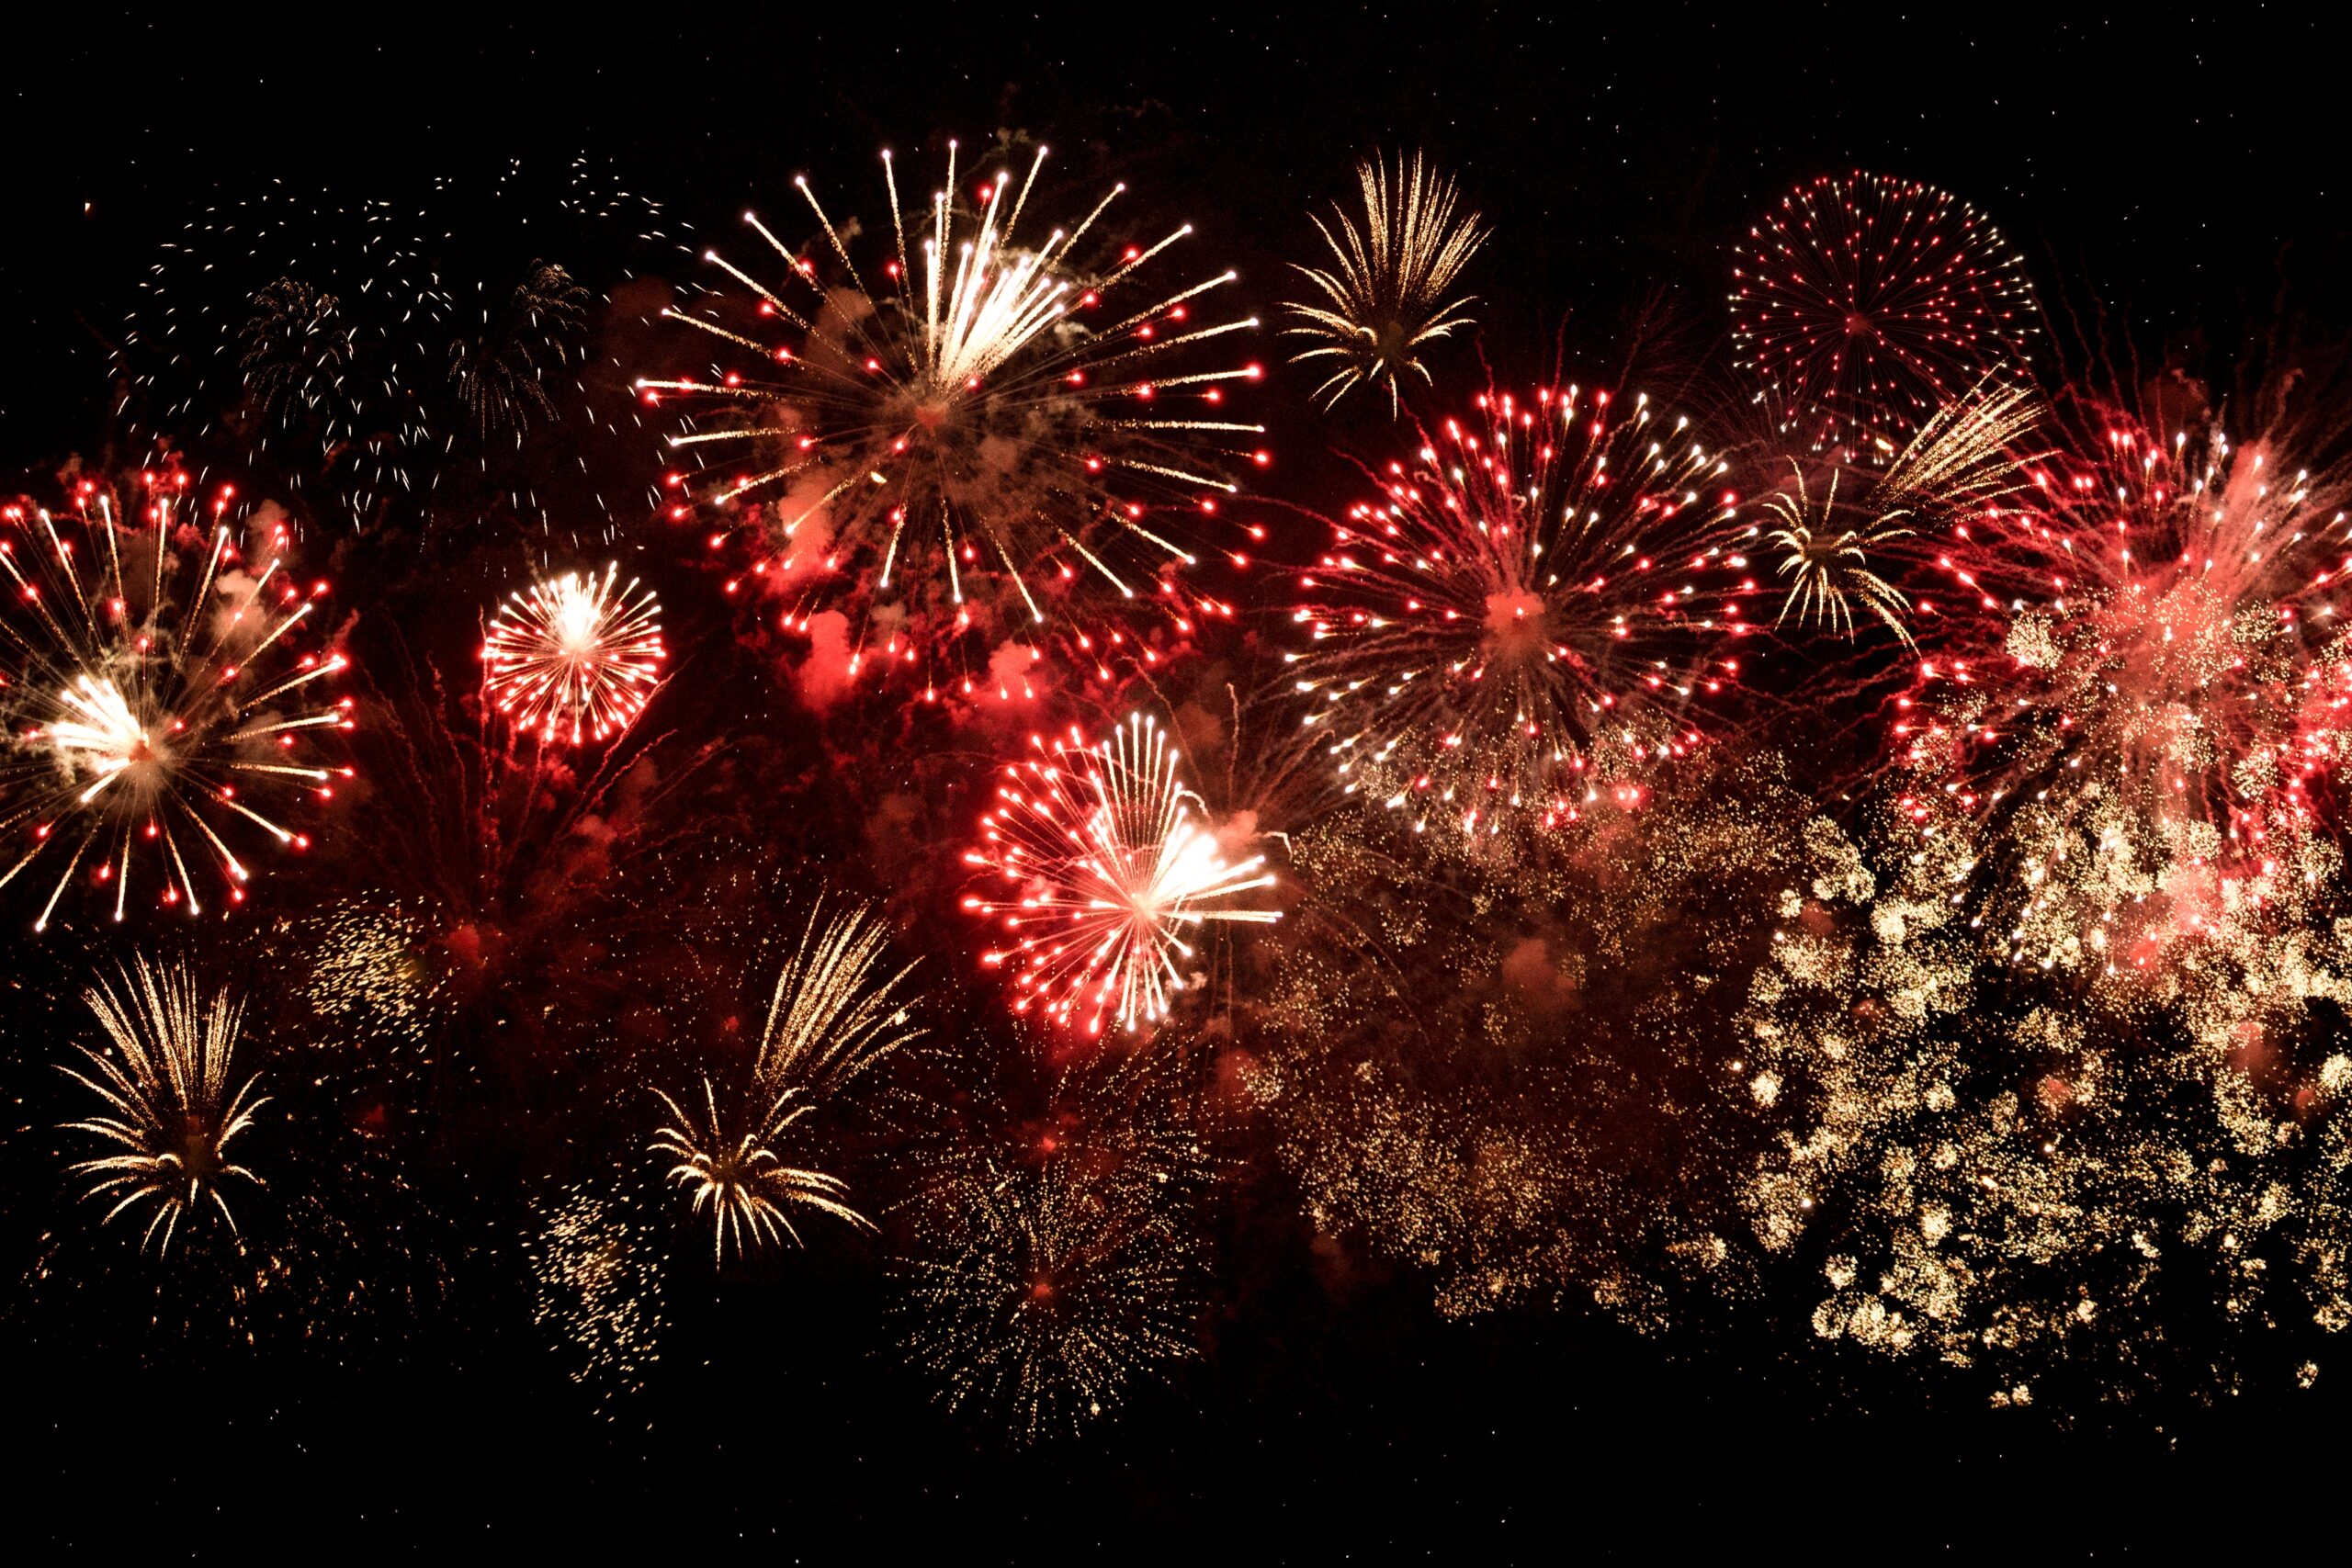 Photo by Designecologist: https://www.pexels.com/photo/photo-of-fireworks-display-2526105/